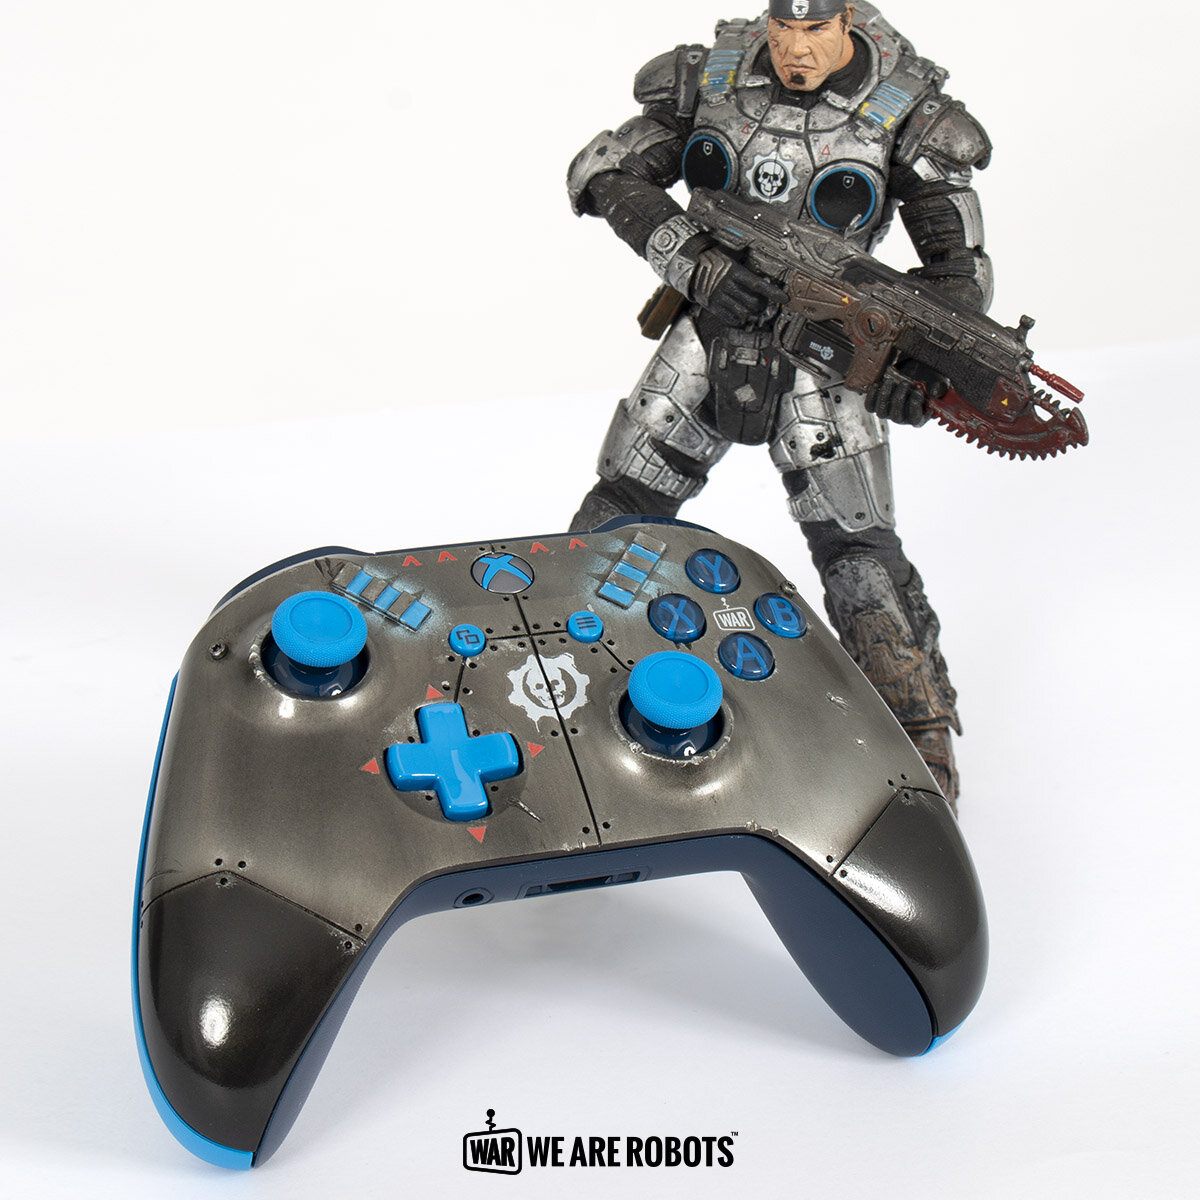 We Are Robots - Gears of War Xbox Controller